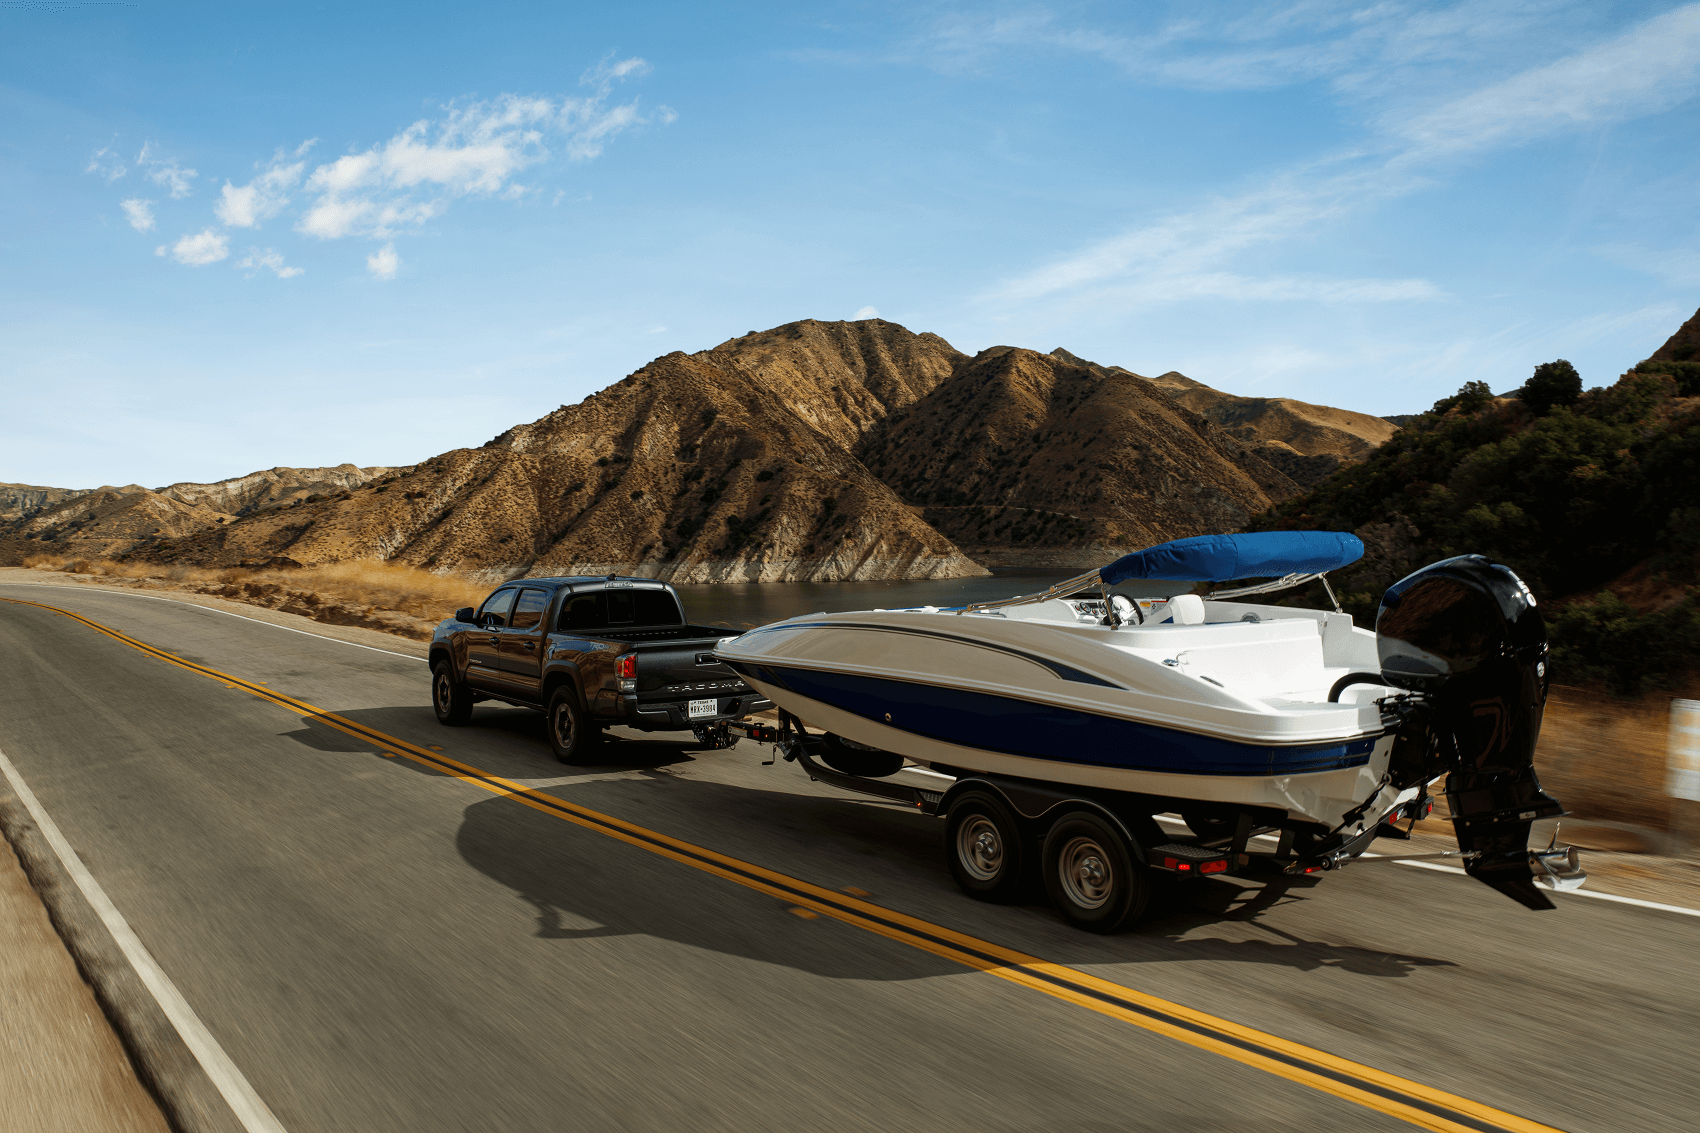 2021 Toyota Tacoma Towing Capacity | Toyota of Bowling Green